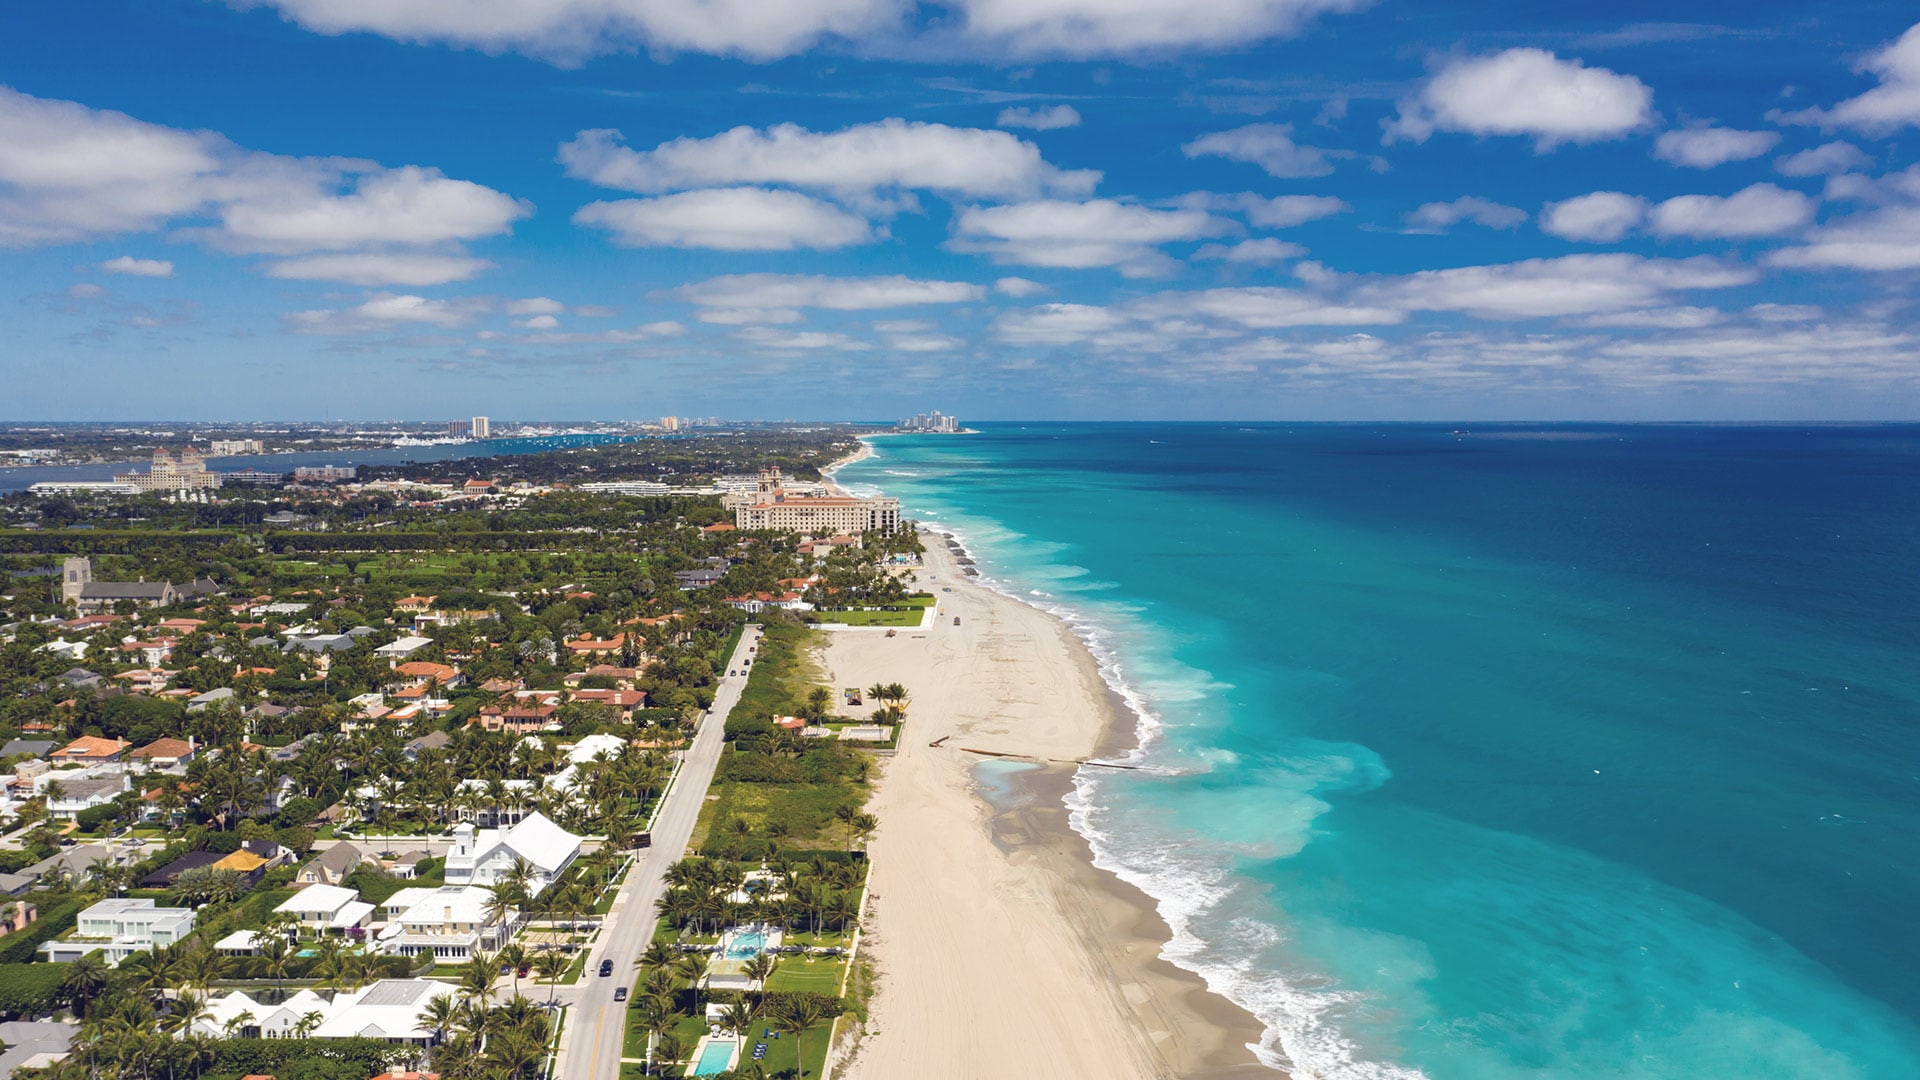 Explore the Culture, Cuisine and Shopping in West Palm Beach, Florida